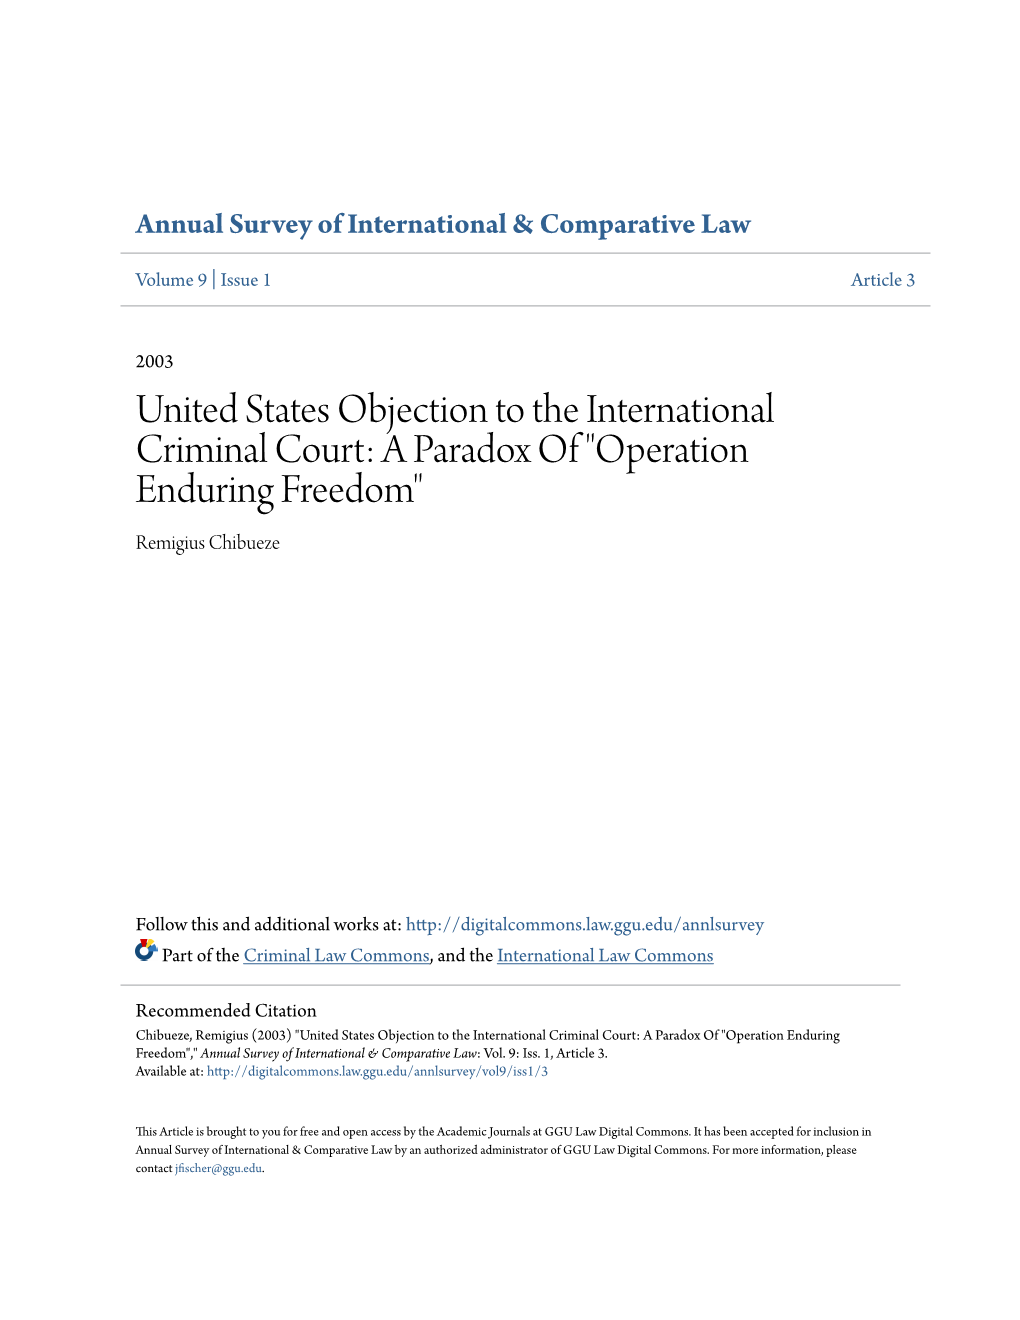 United States Objection to the International Criminal Court: a Paradox of "Operation Enduring Freedom" Remigius Chibueze